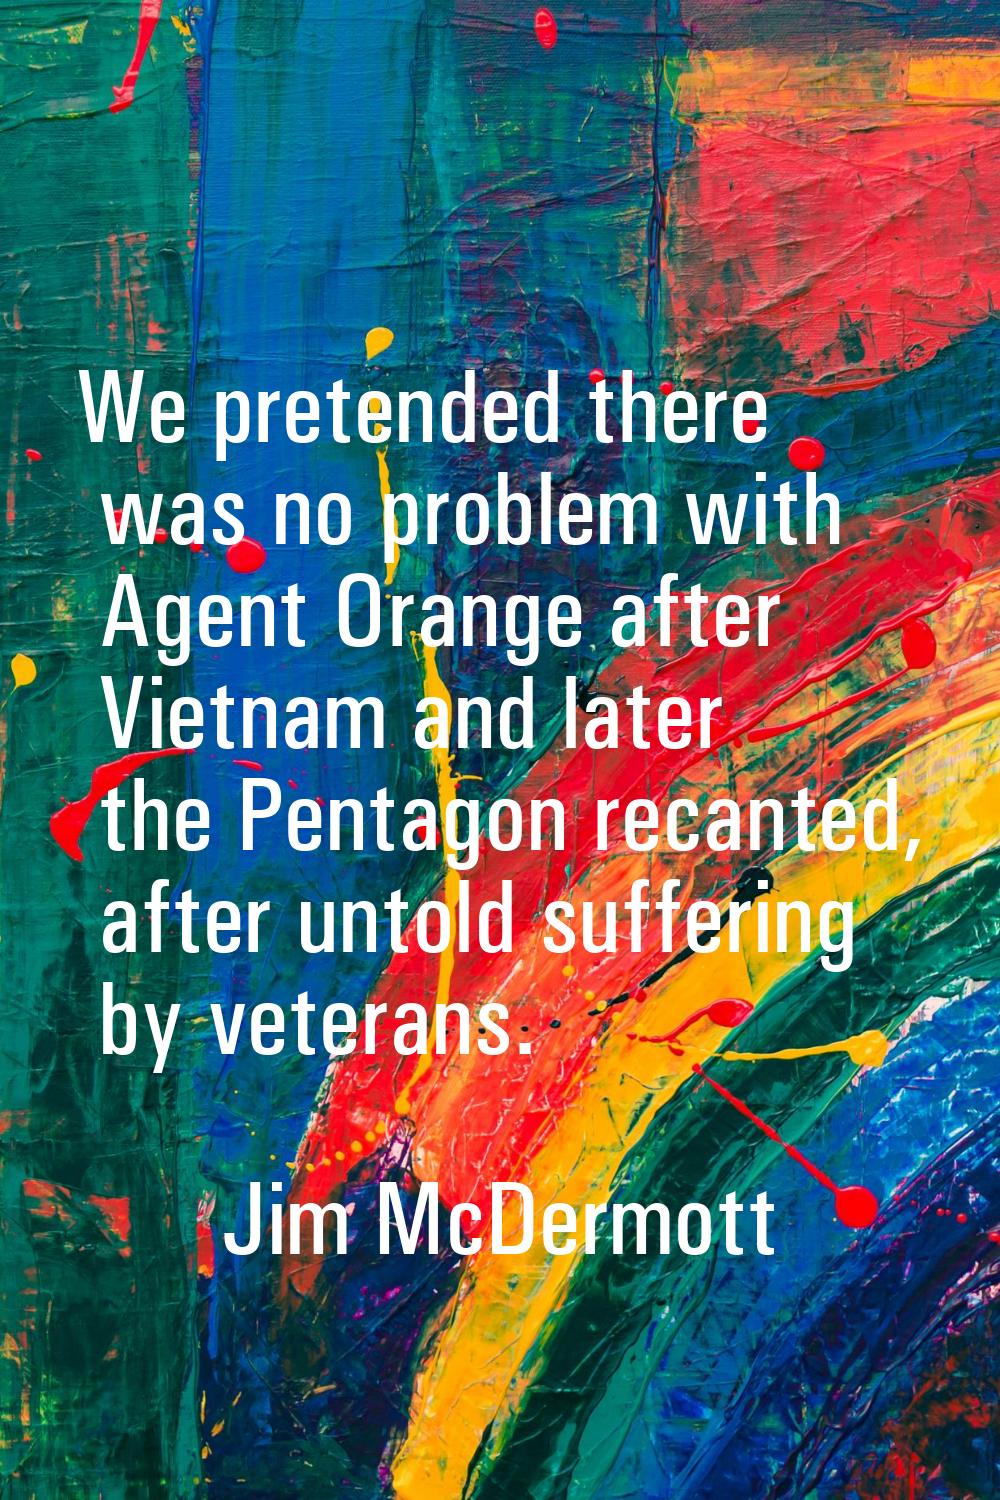 We pretended there was no problem with Agent Orange after Vietnam and later the Pentagon recanted, 